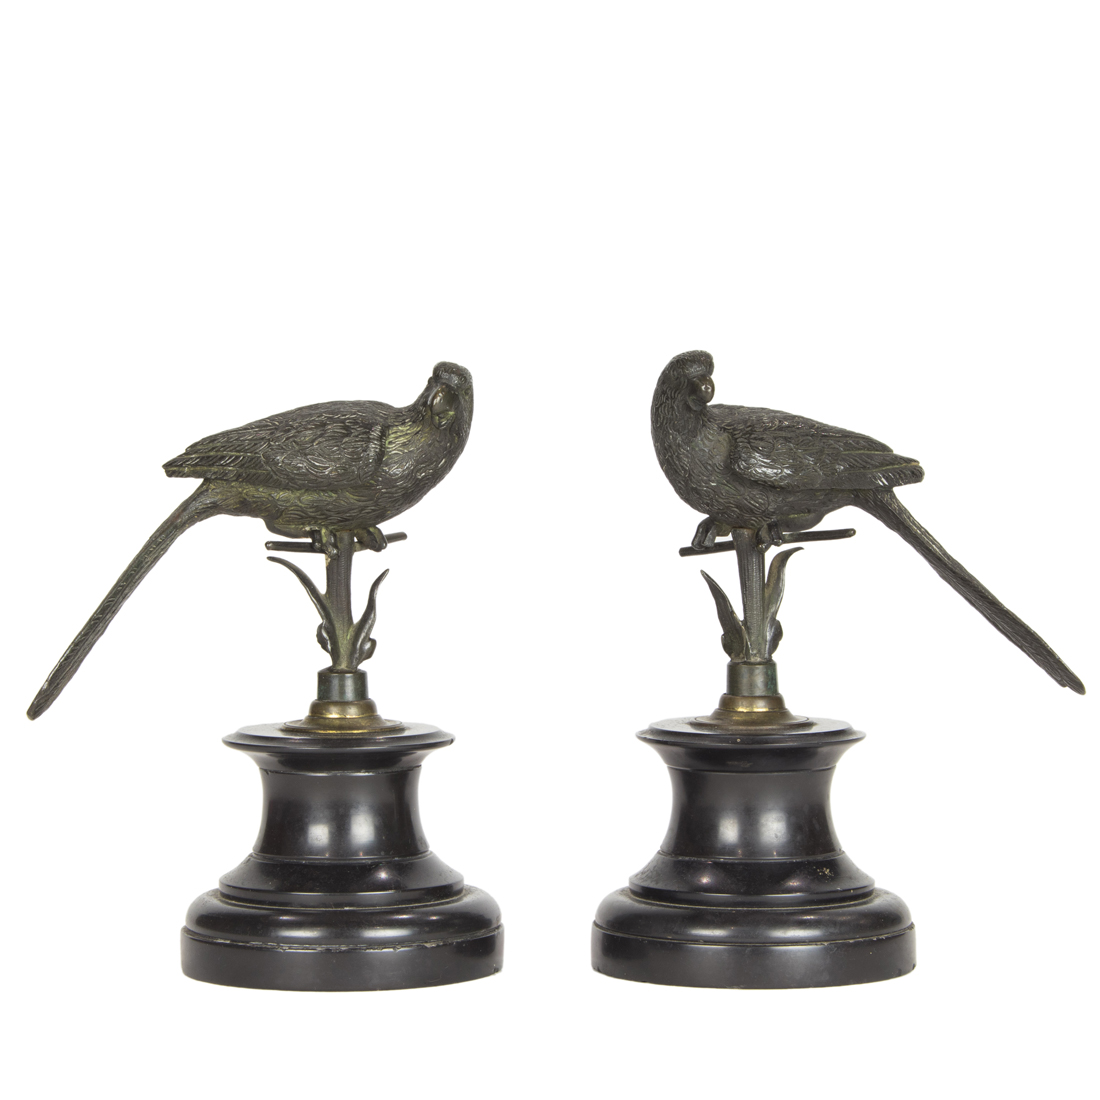 A PAIR OF BRONZE FIGURES OF FALCONS